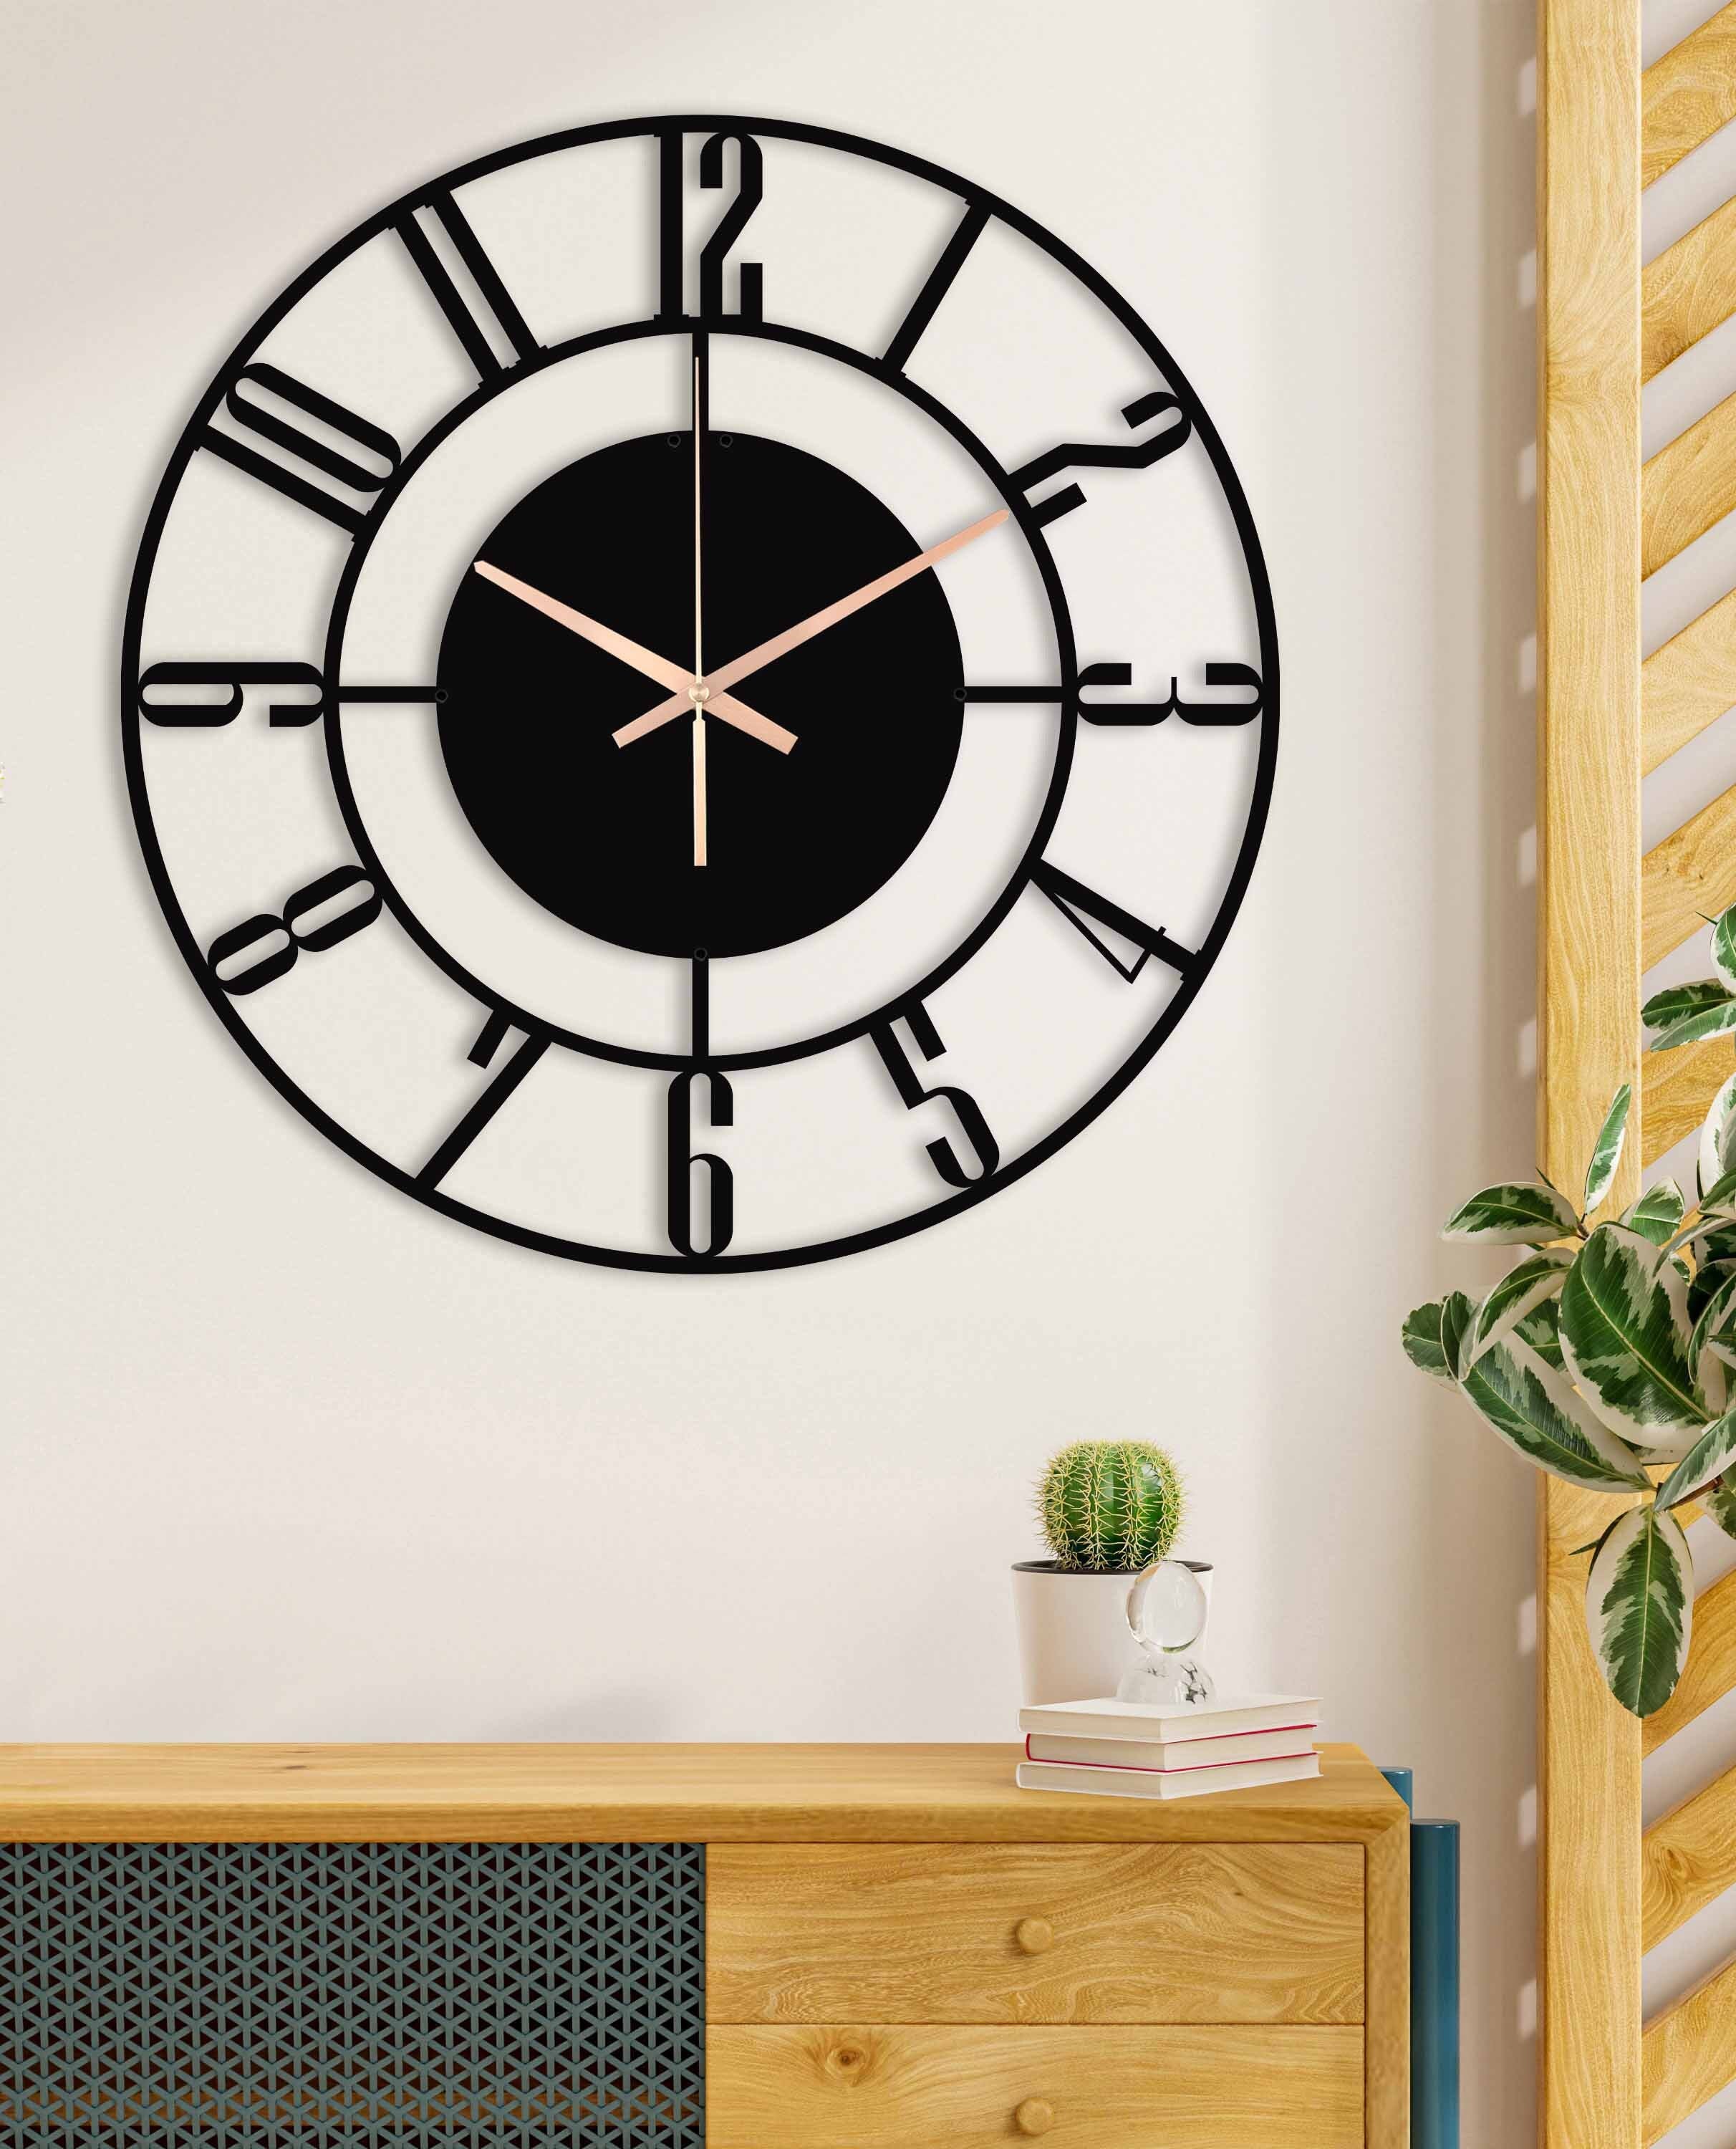 Metal Mantel Clock, Wall Clock, Large Metal Wall Clock, Black Wall Clock Modern Oversized Wall Clock With Numbers, Clocks For Wall